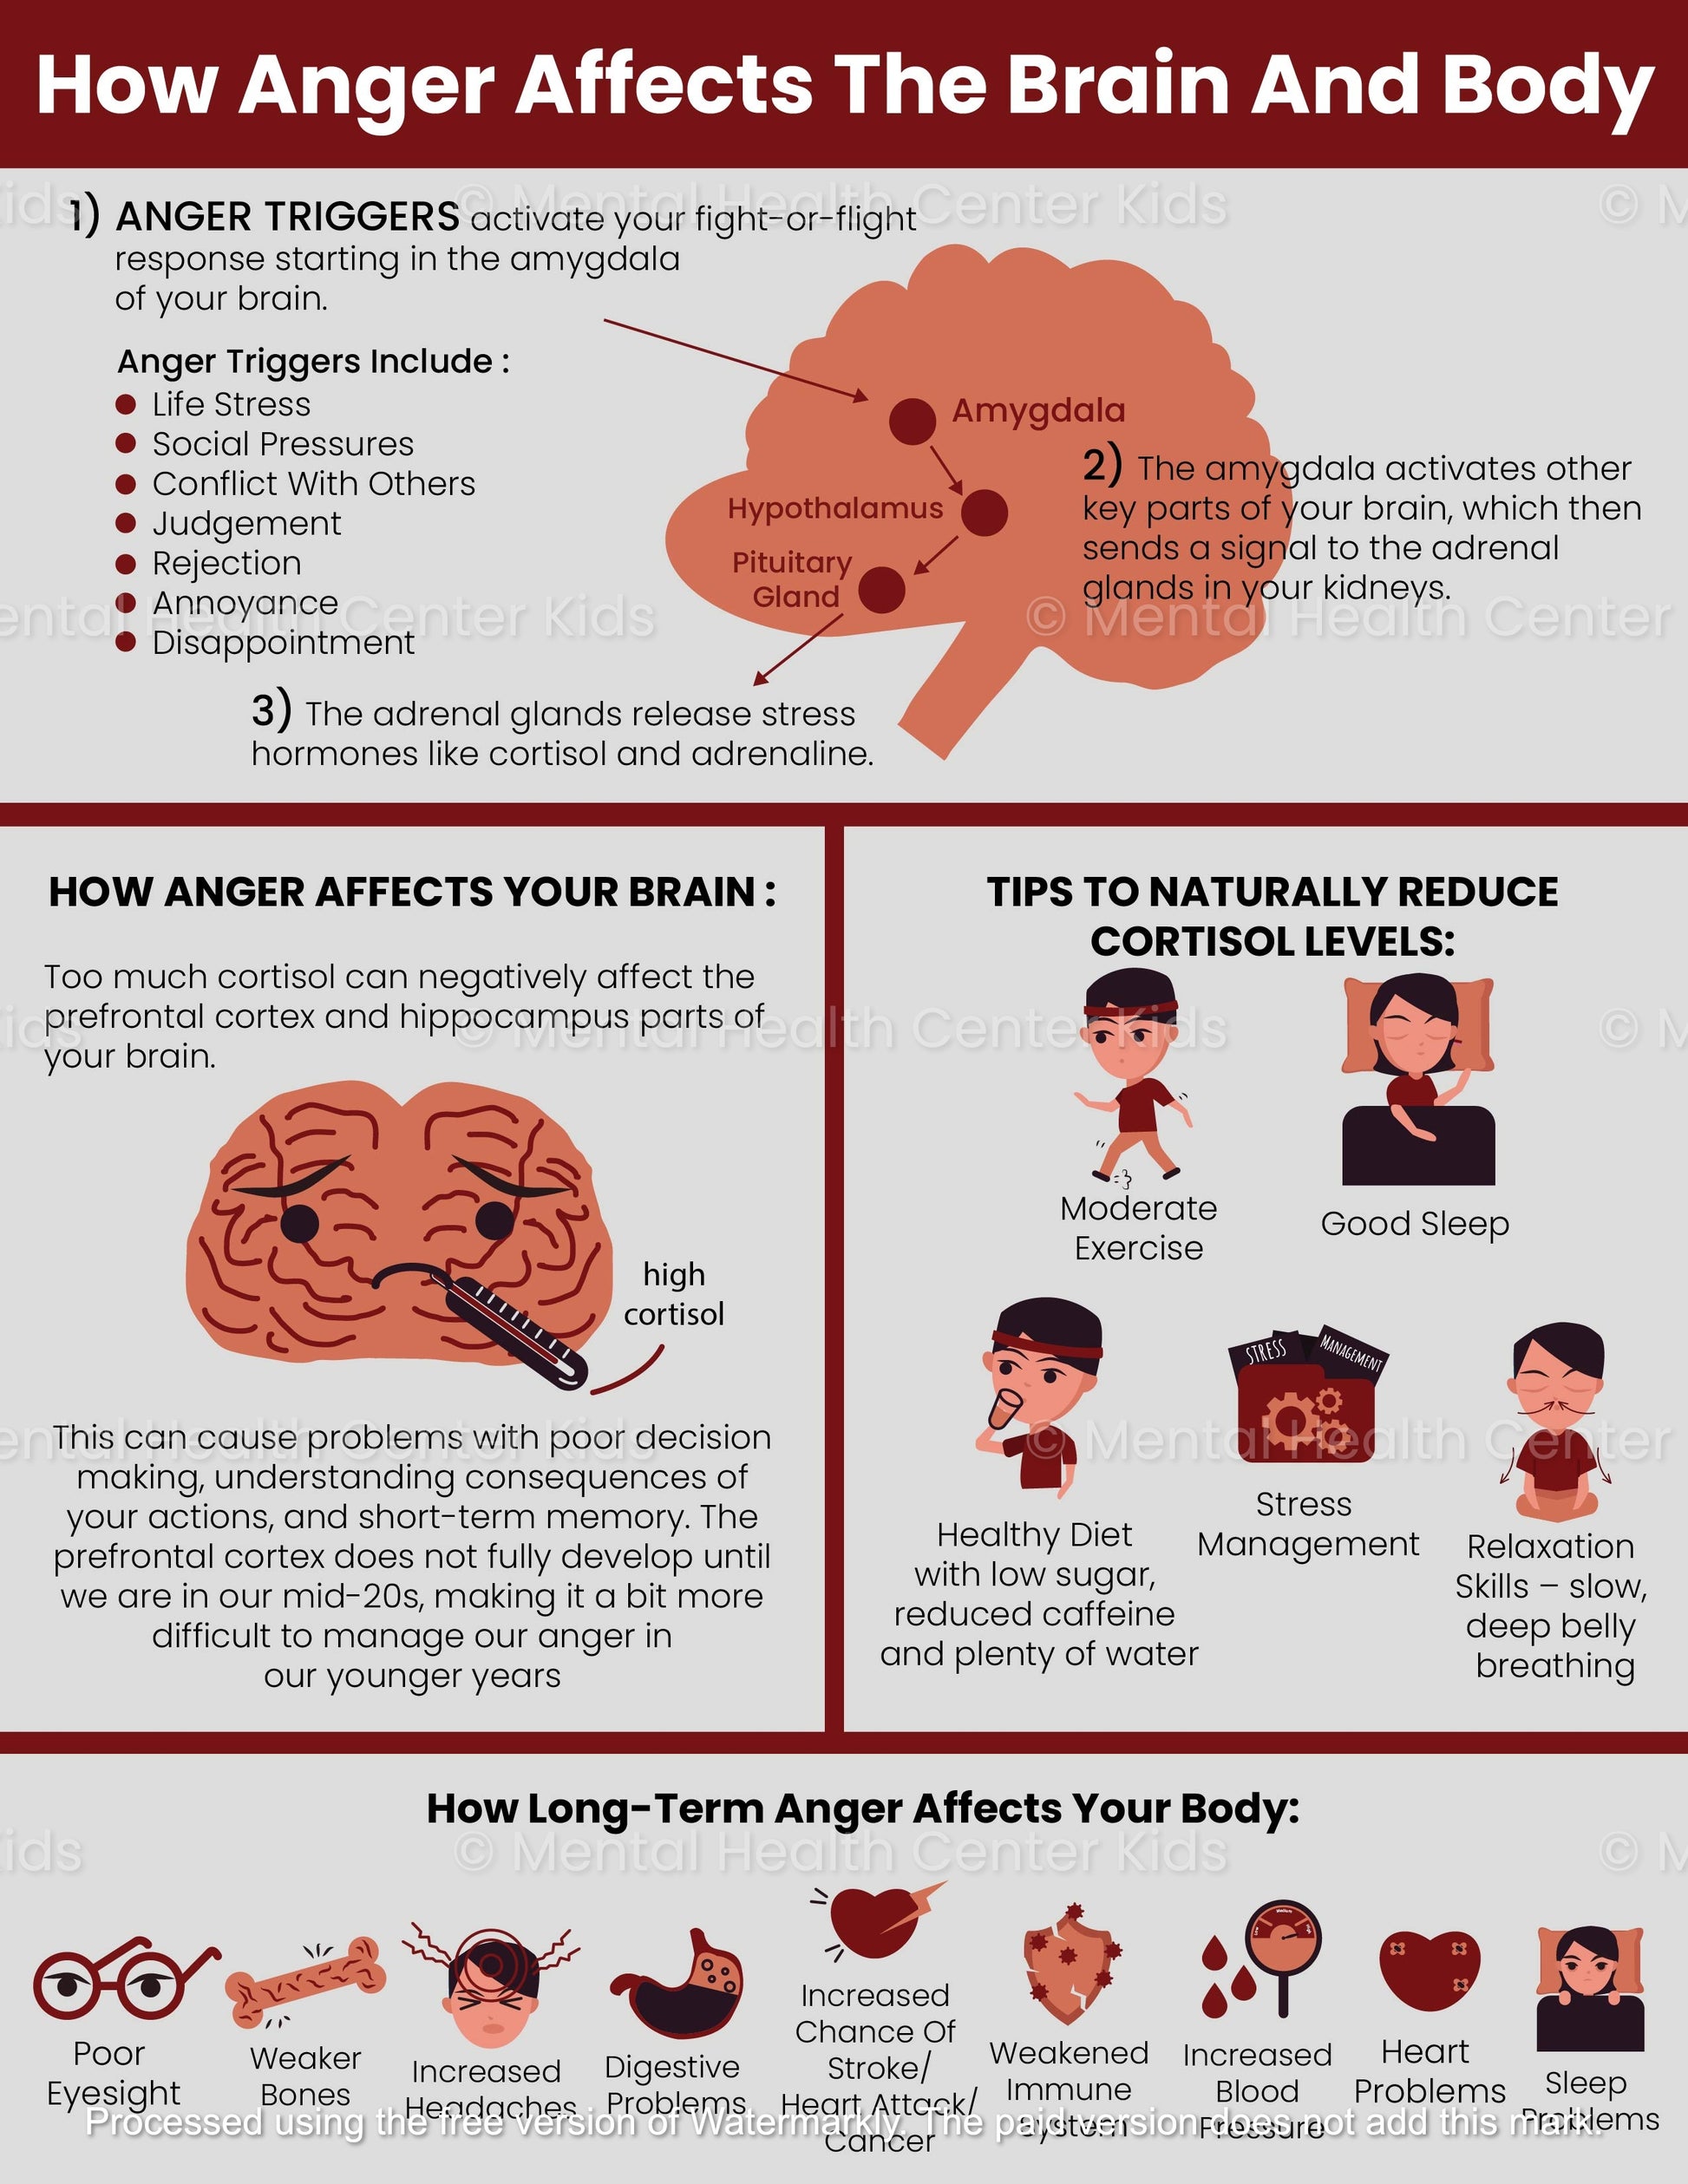 How Anger Affects the Brain and Body pdf handout